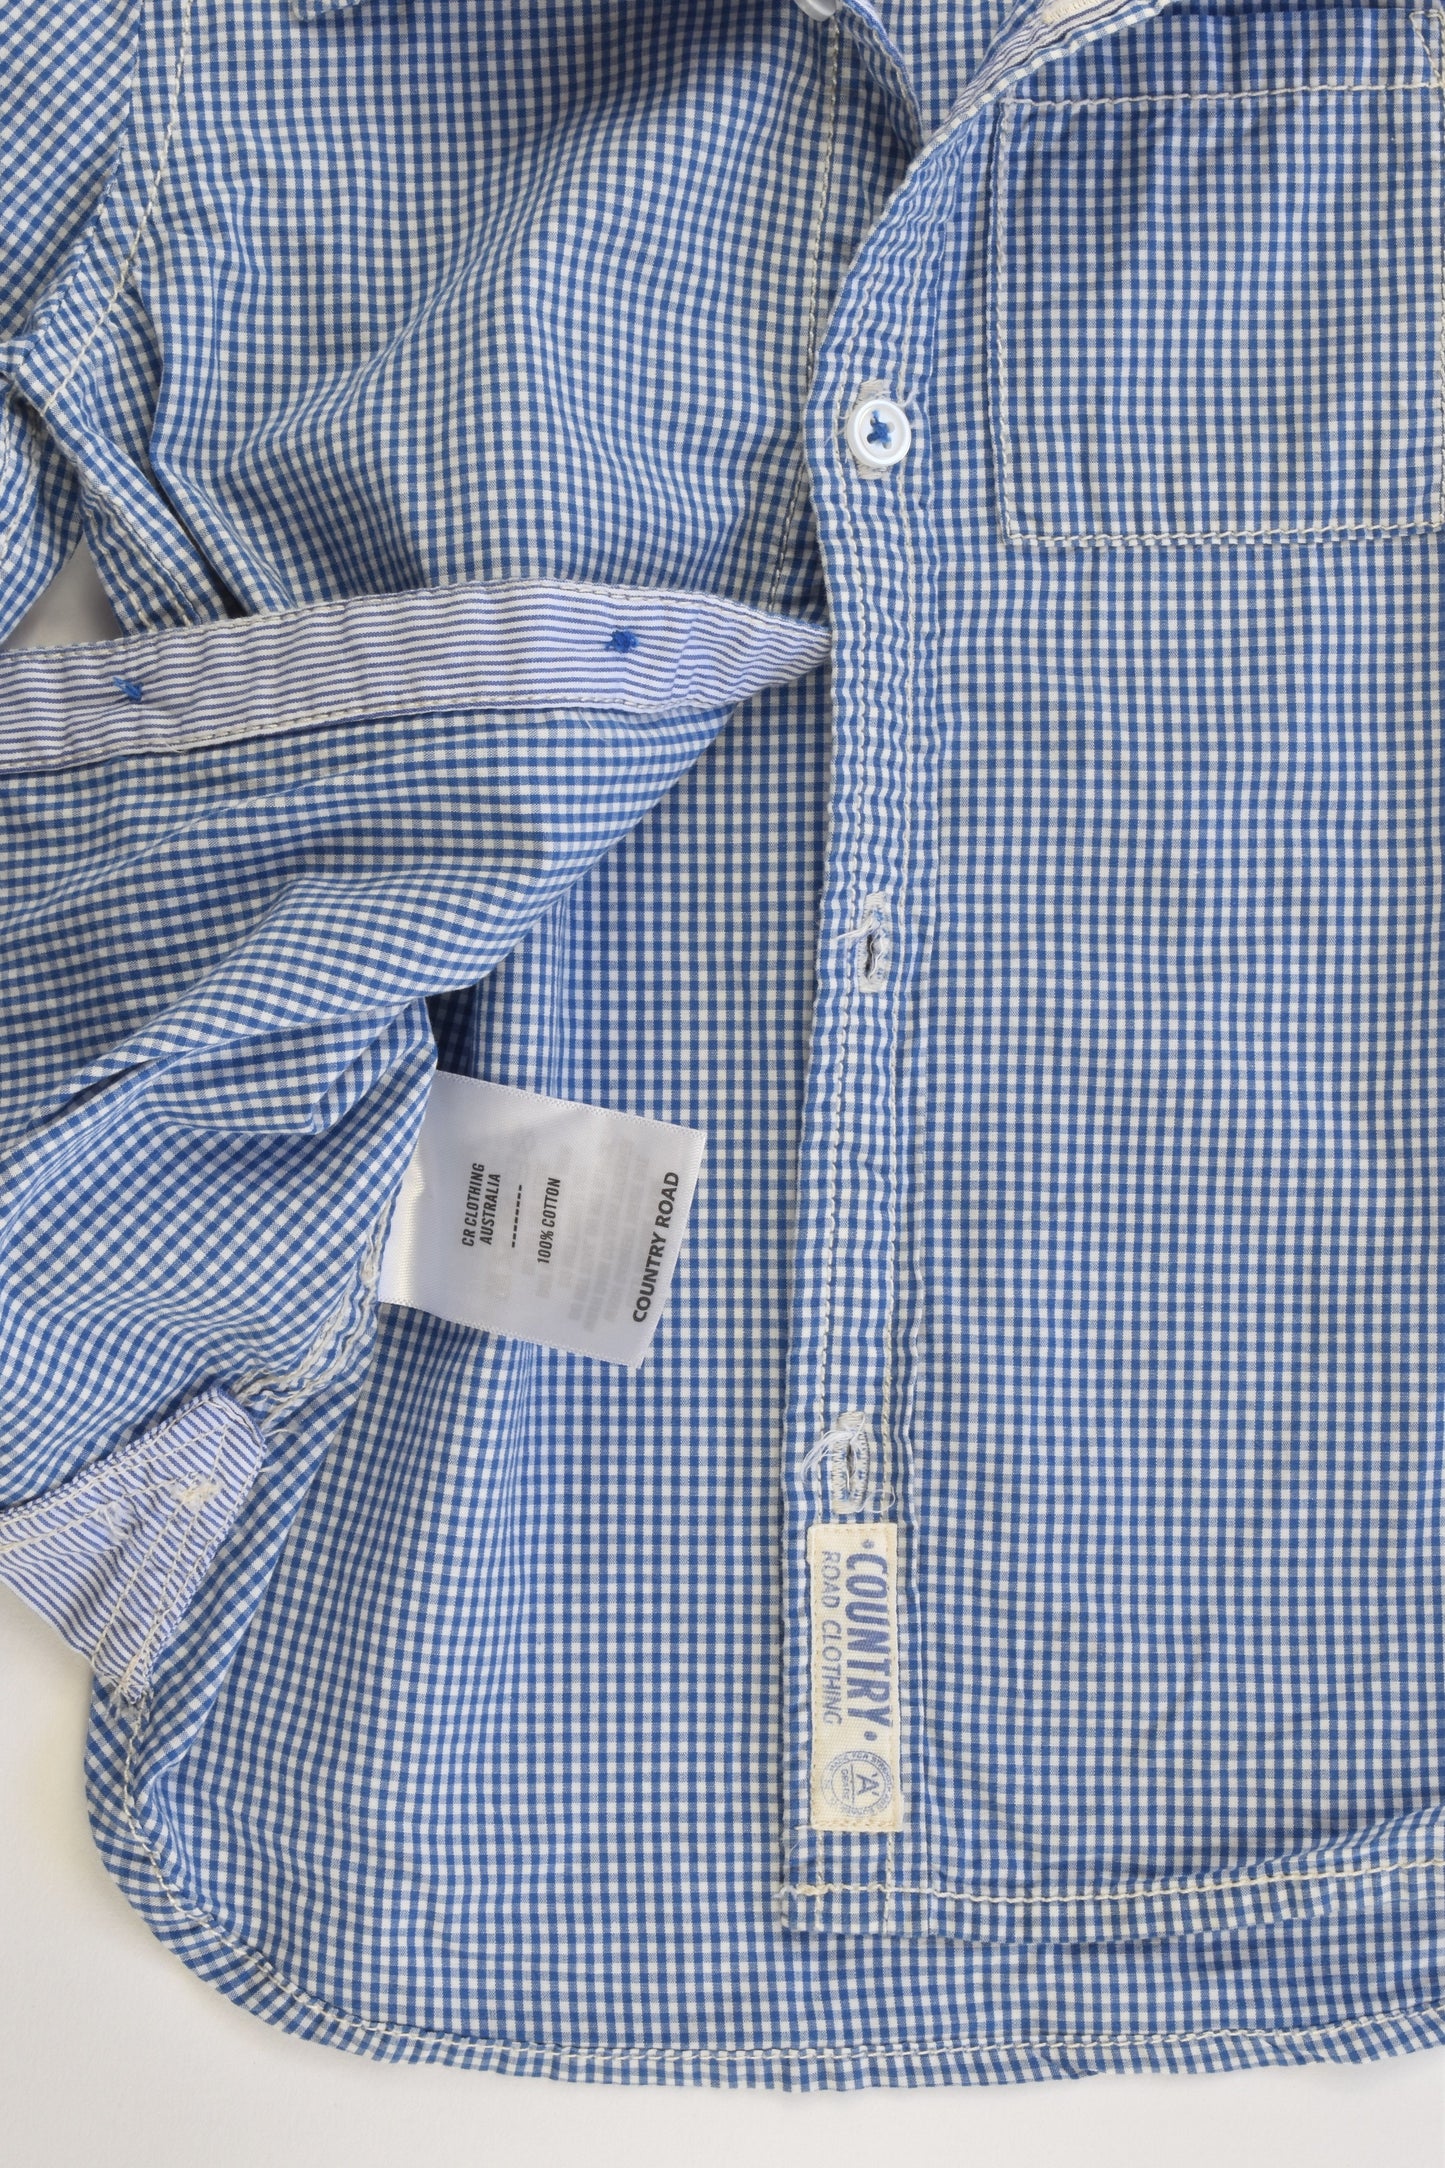 Country Road Size 18-24 months (2) Checked Collared Shirt